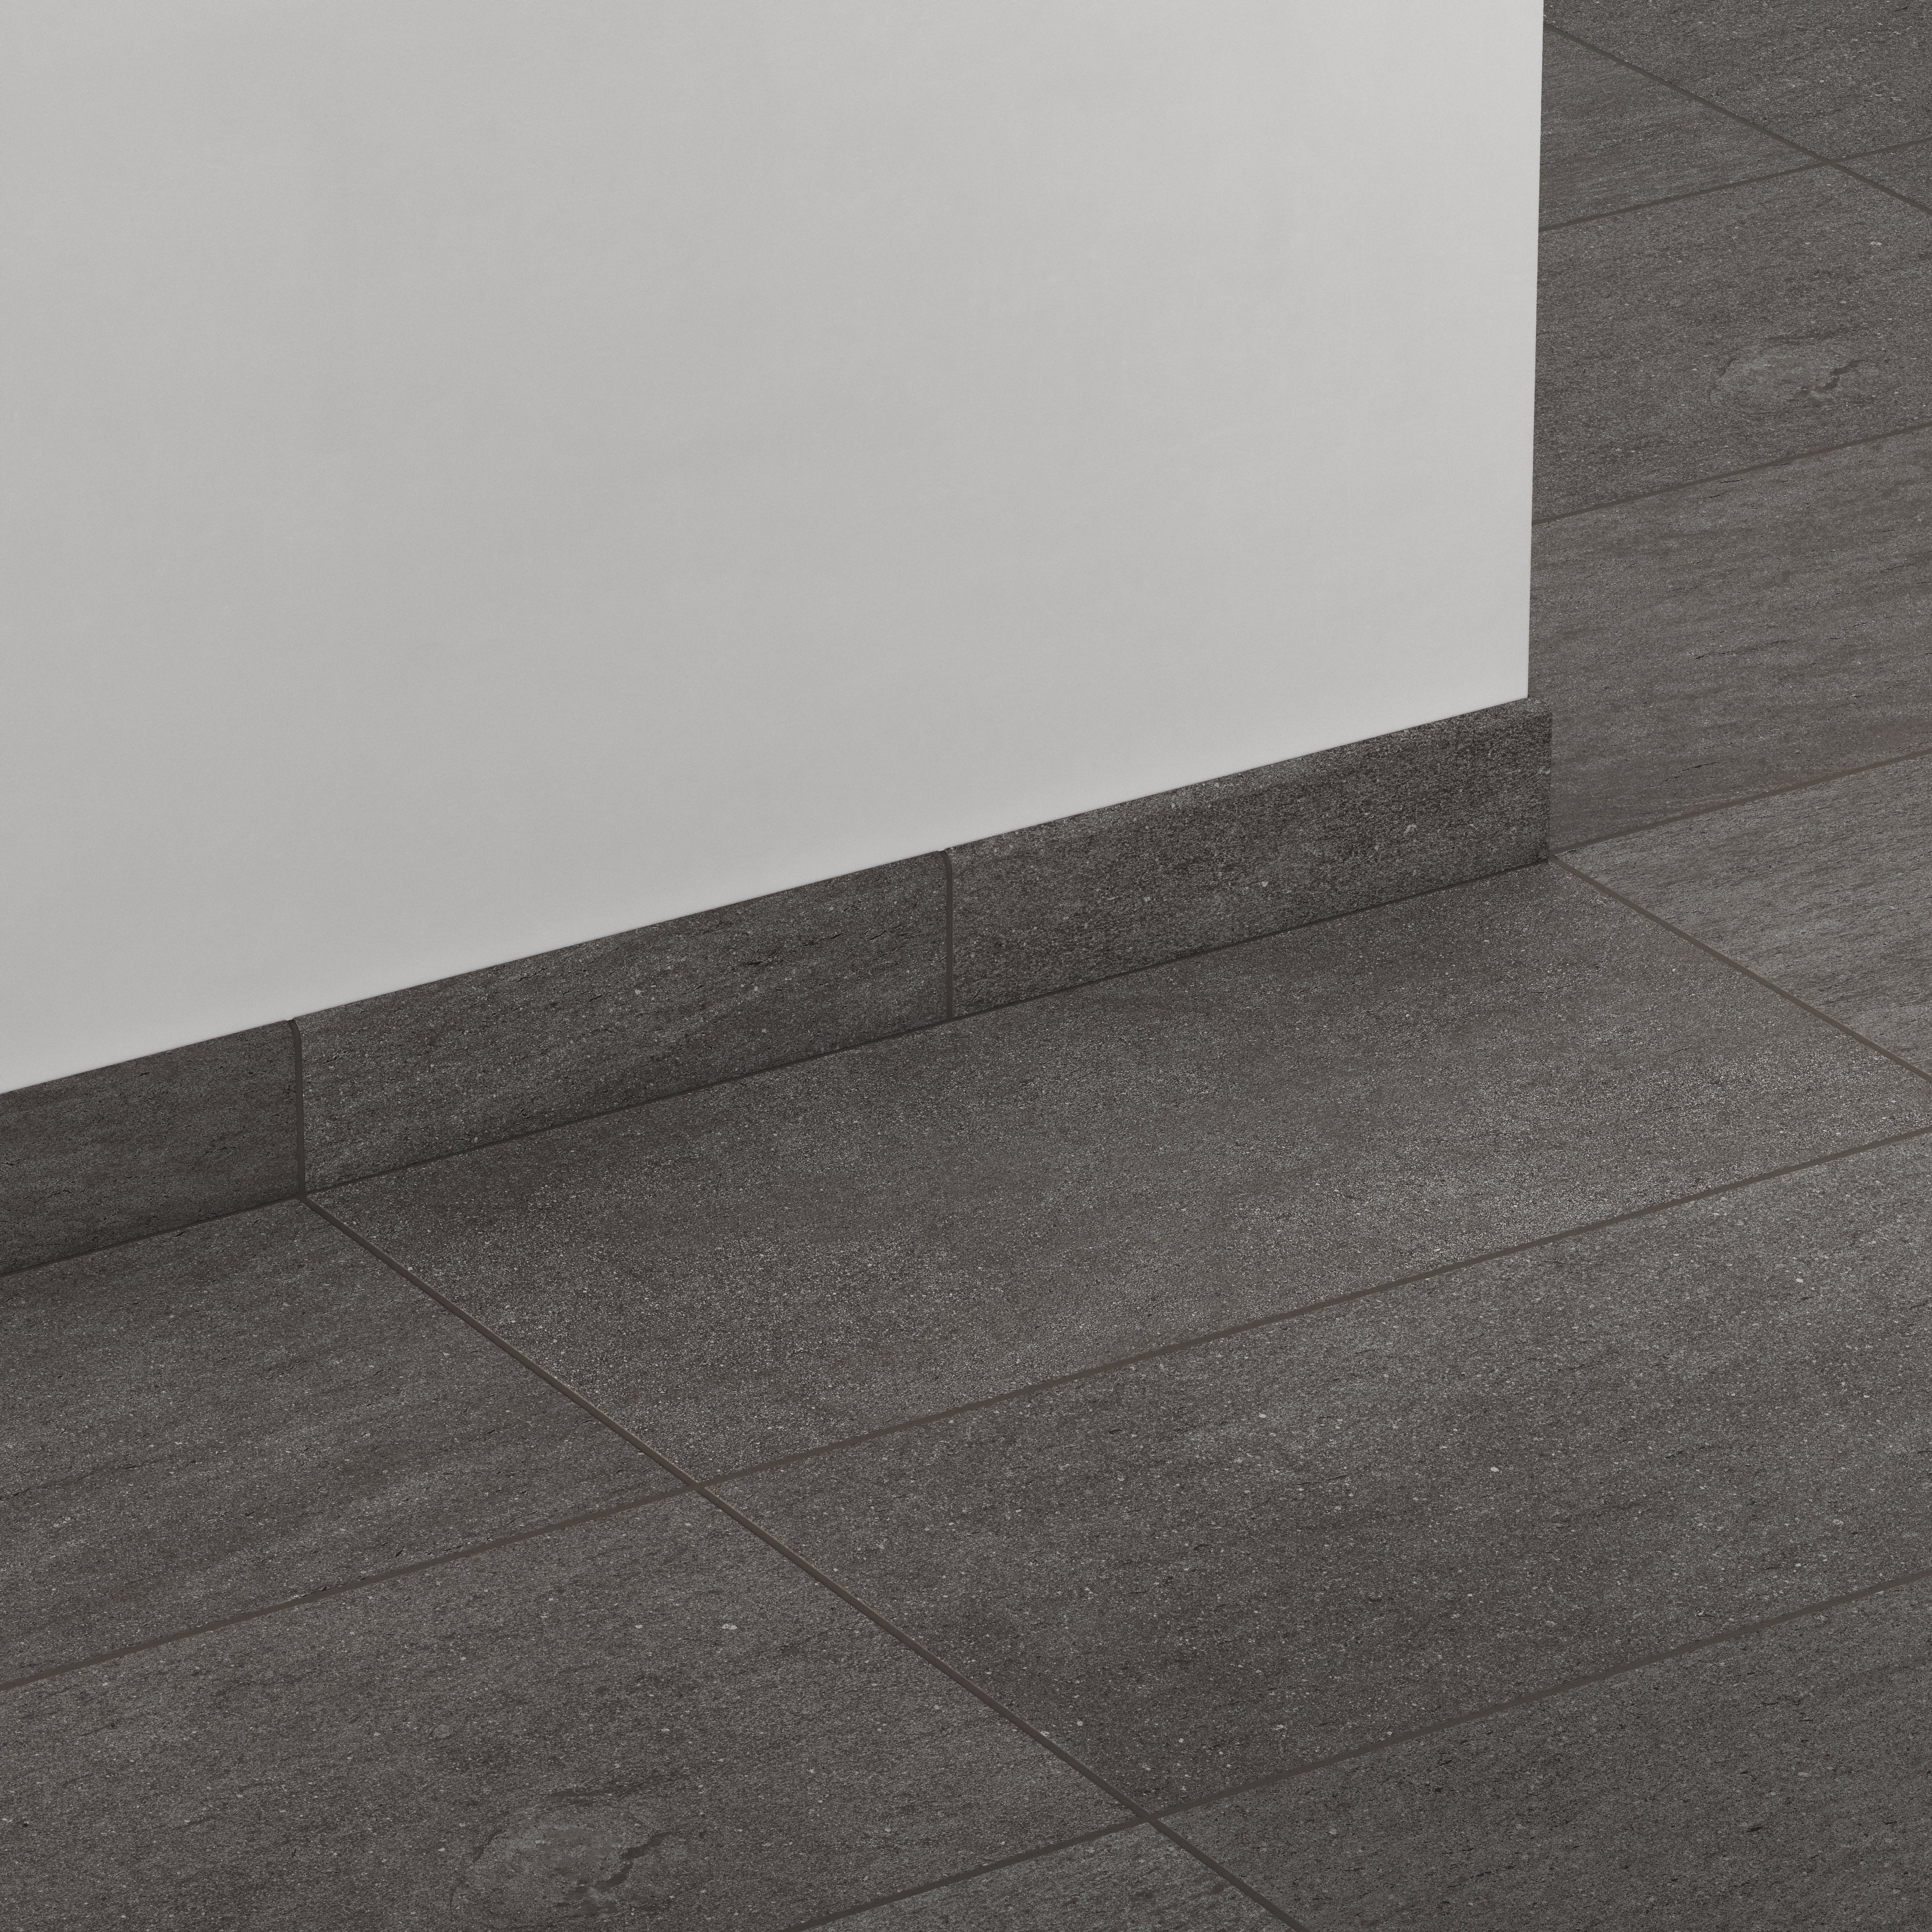 Brody 6x12 Matte Porcelain Cove Base Tile in Cliff